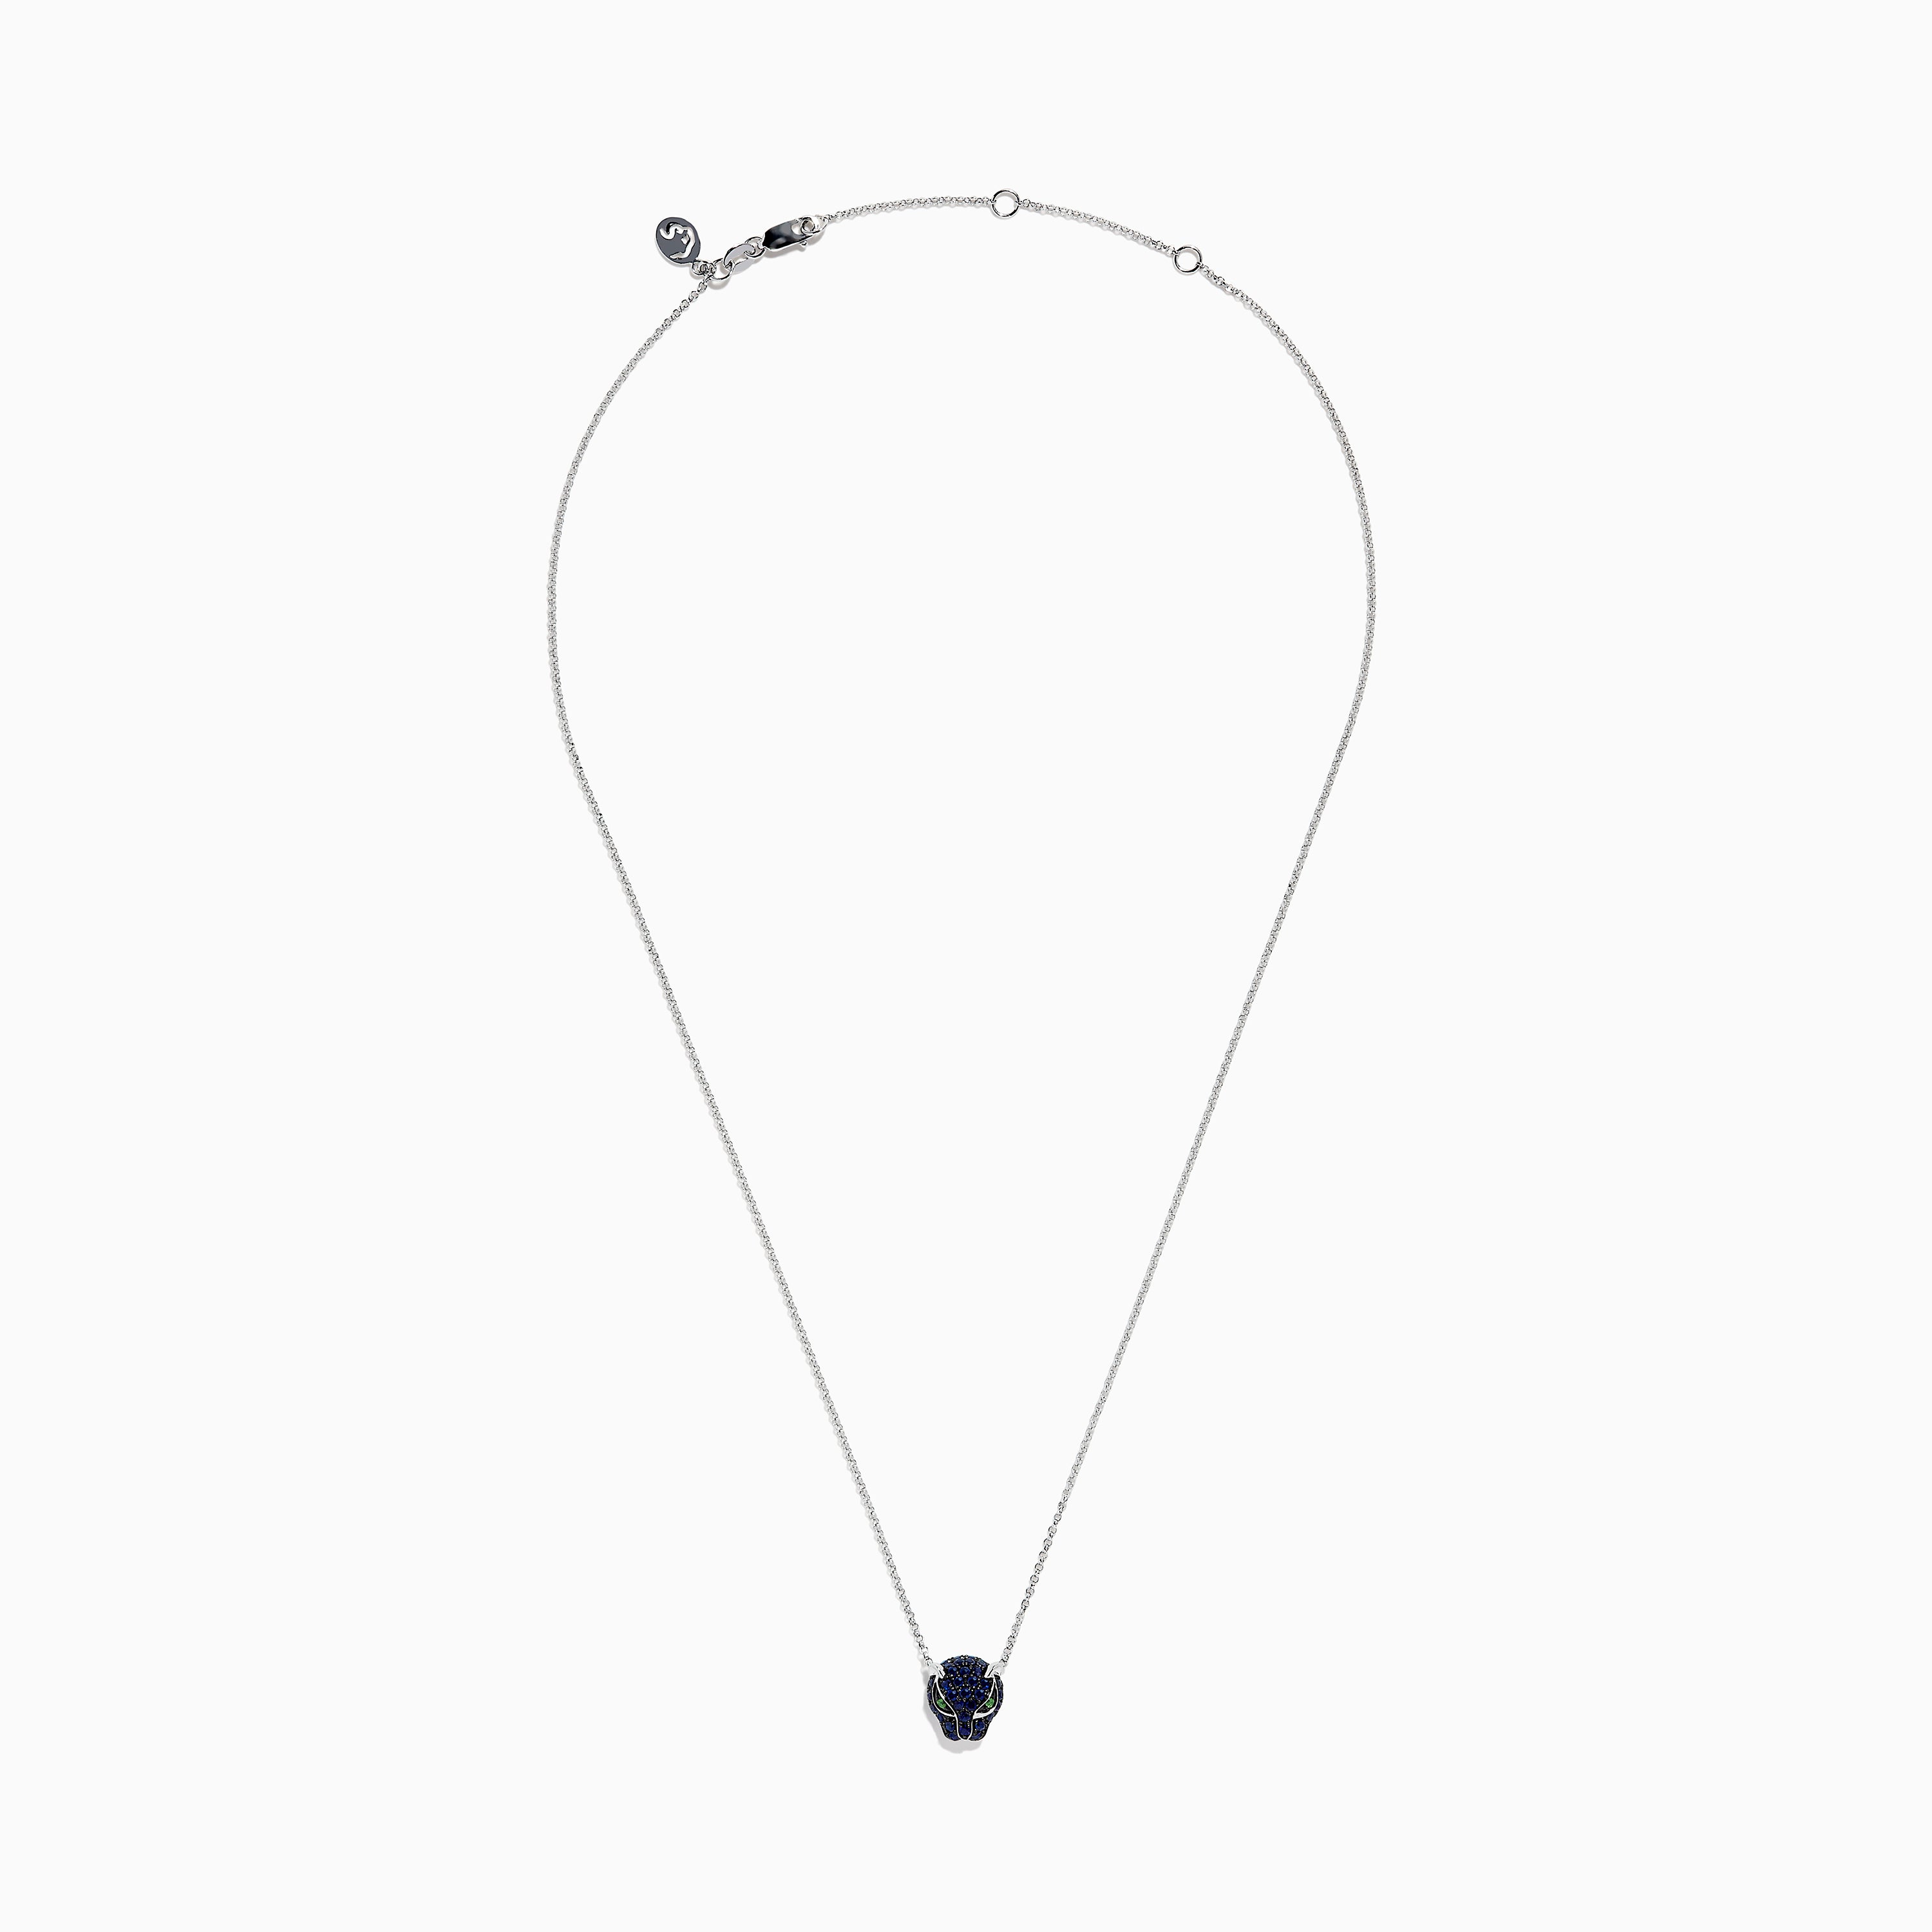 Effy Signature 14K White Gold Blue Sapphire and Tsavorite Panther Necklace